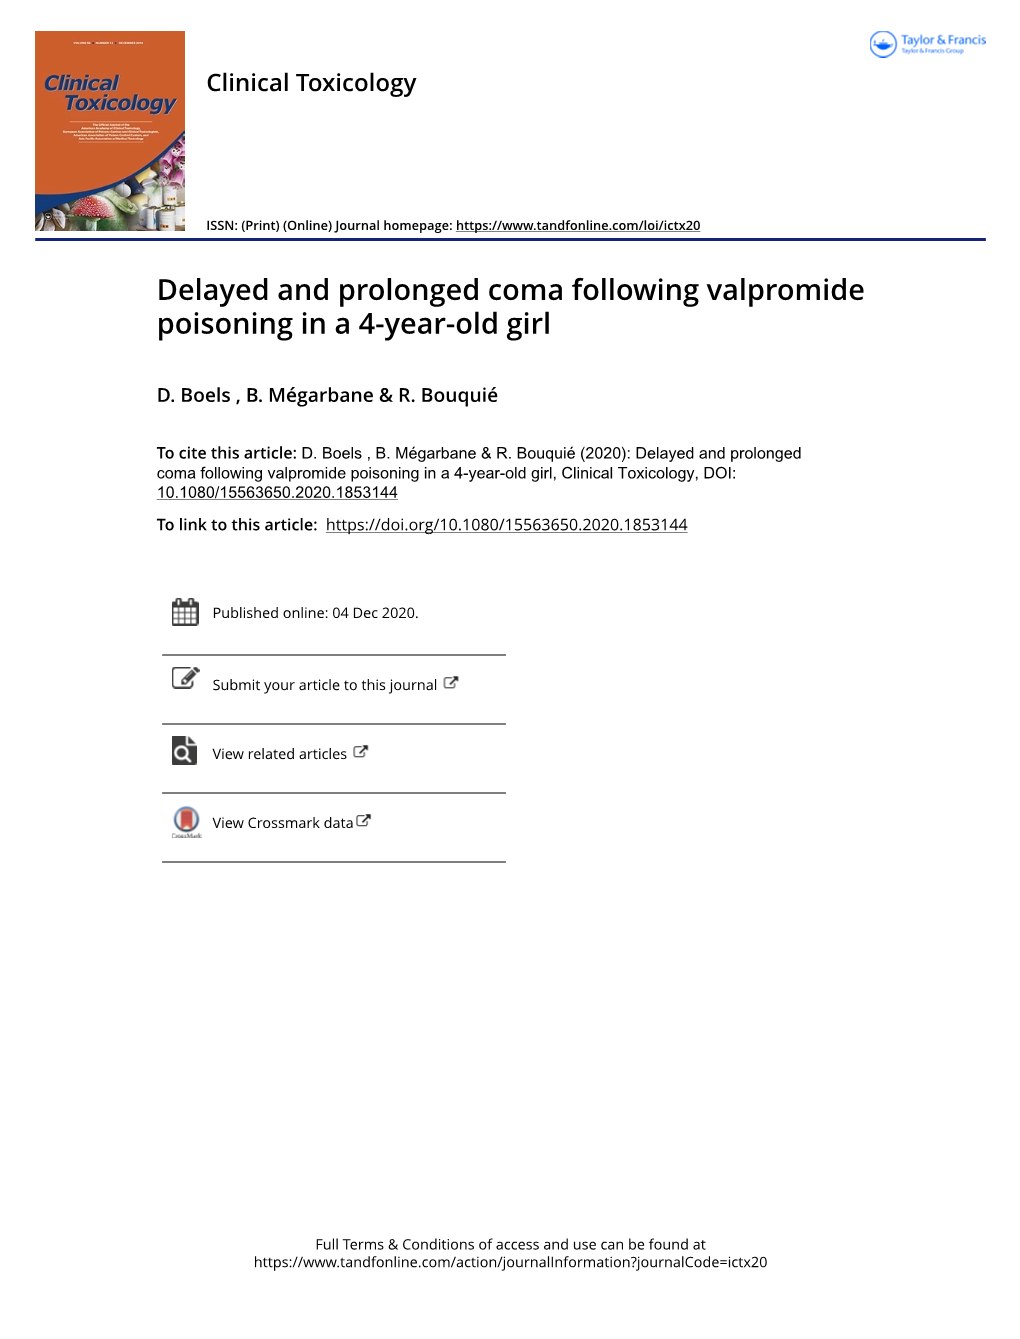 Delayed and Prolonged Coma Following Valpromide Poisoning in a 4-Year-Old Girl